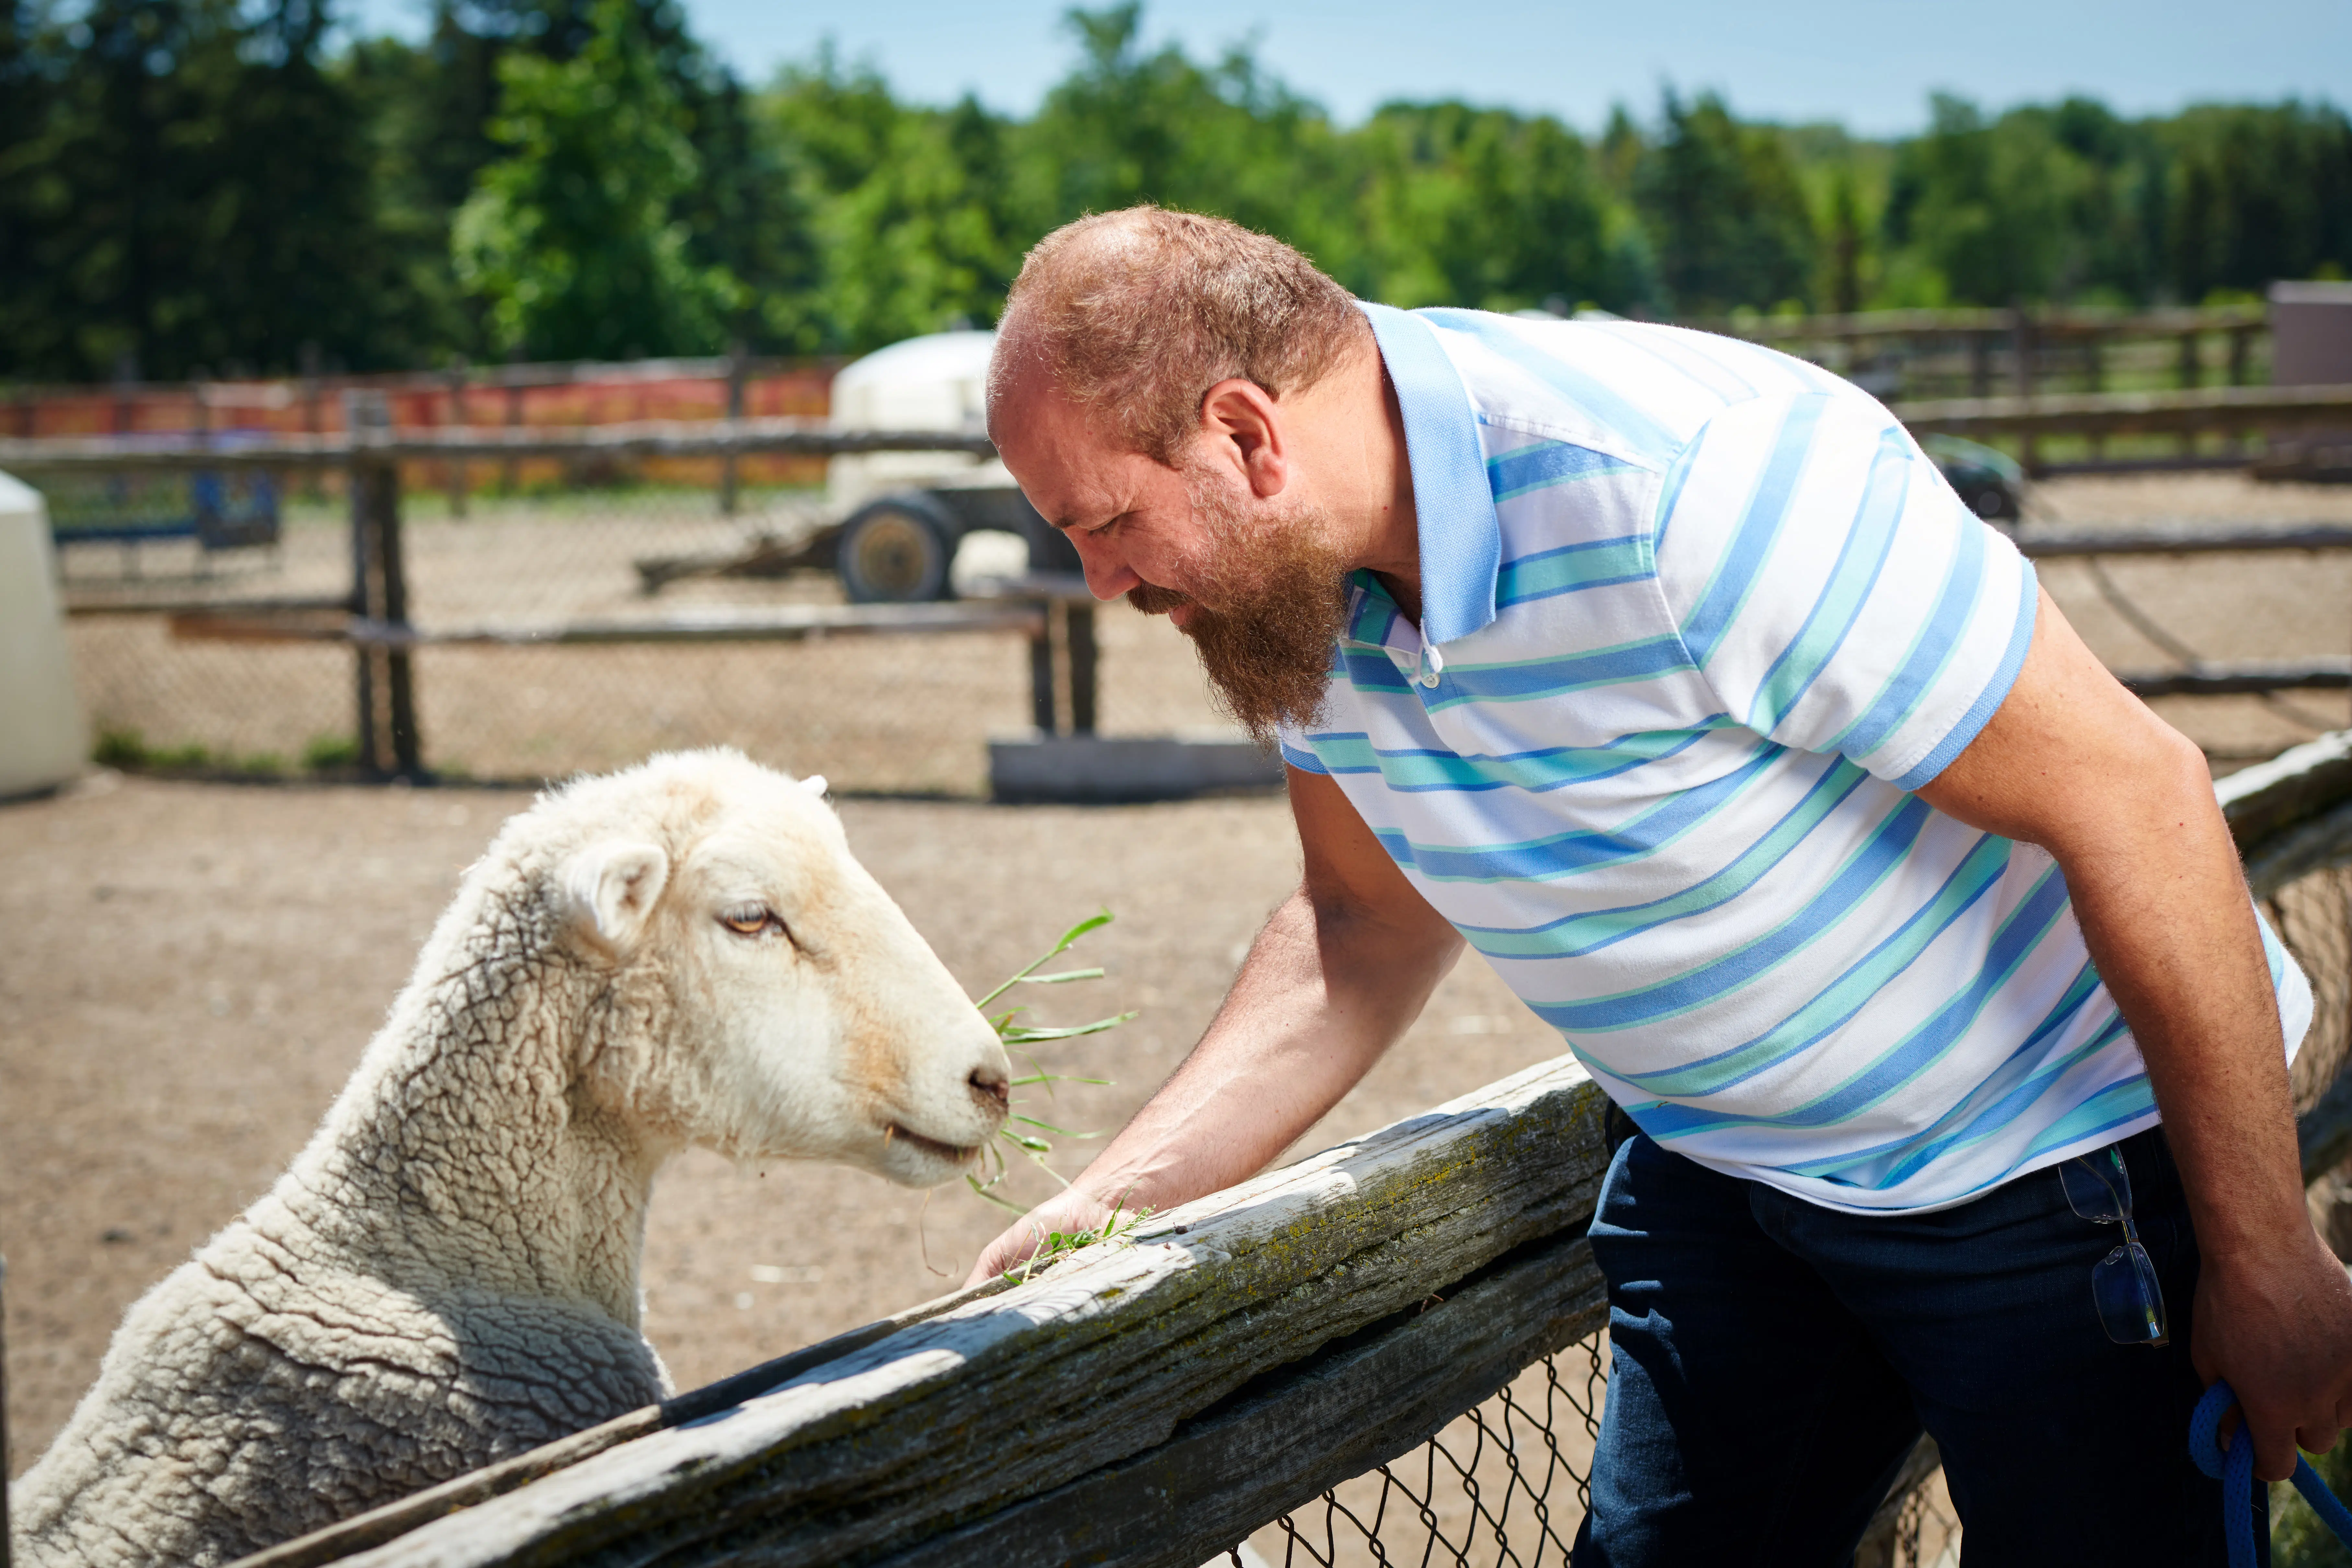 A man feeds a sheep grass as he leans over a wood fence.